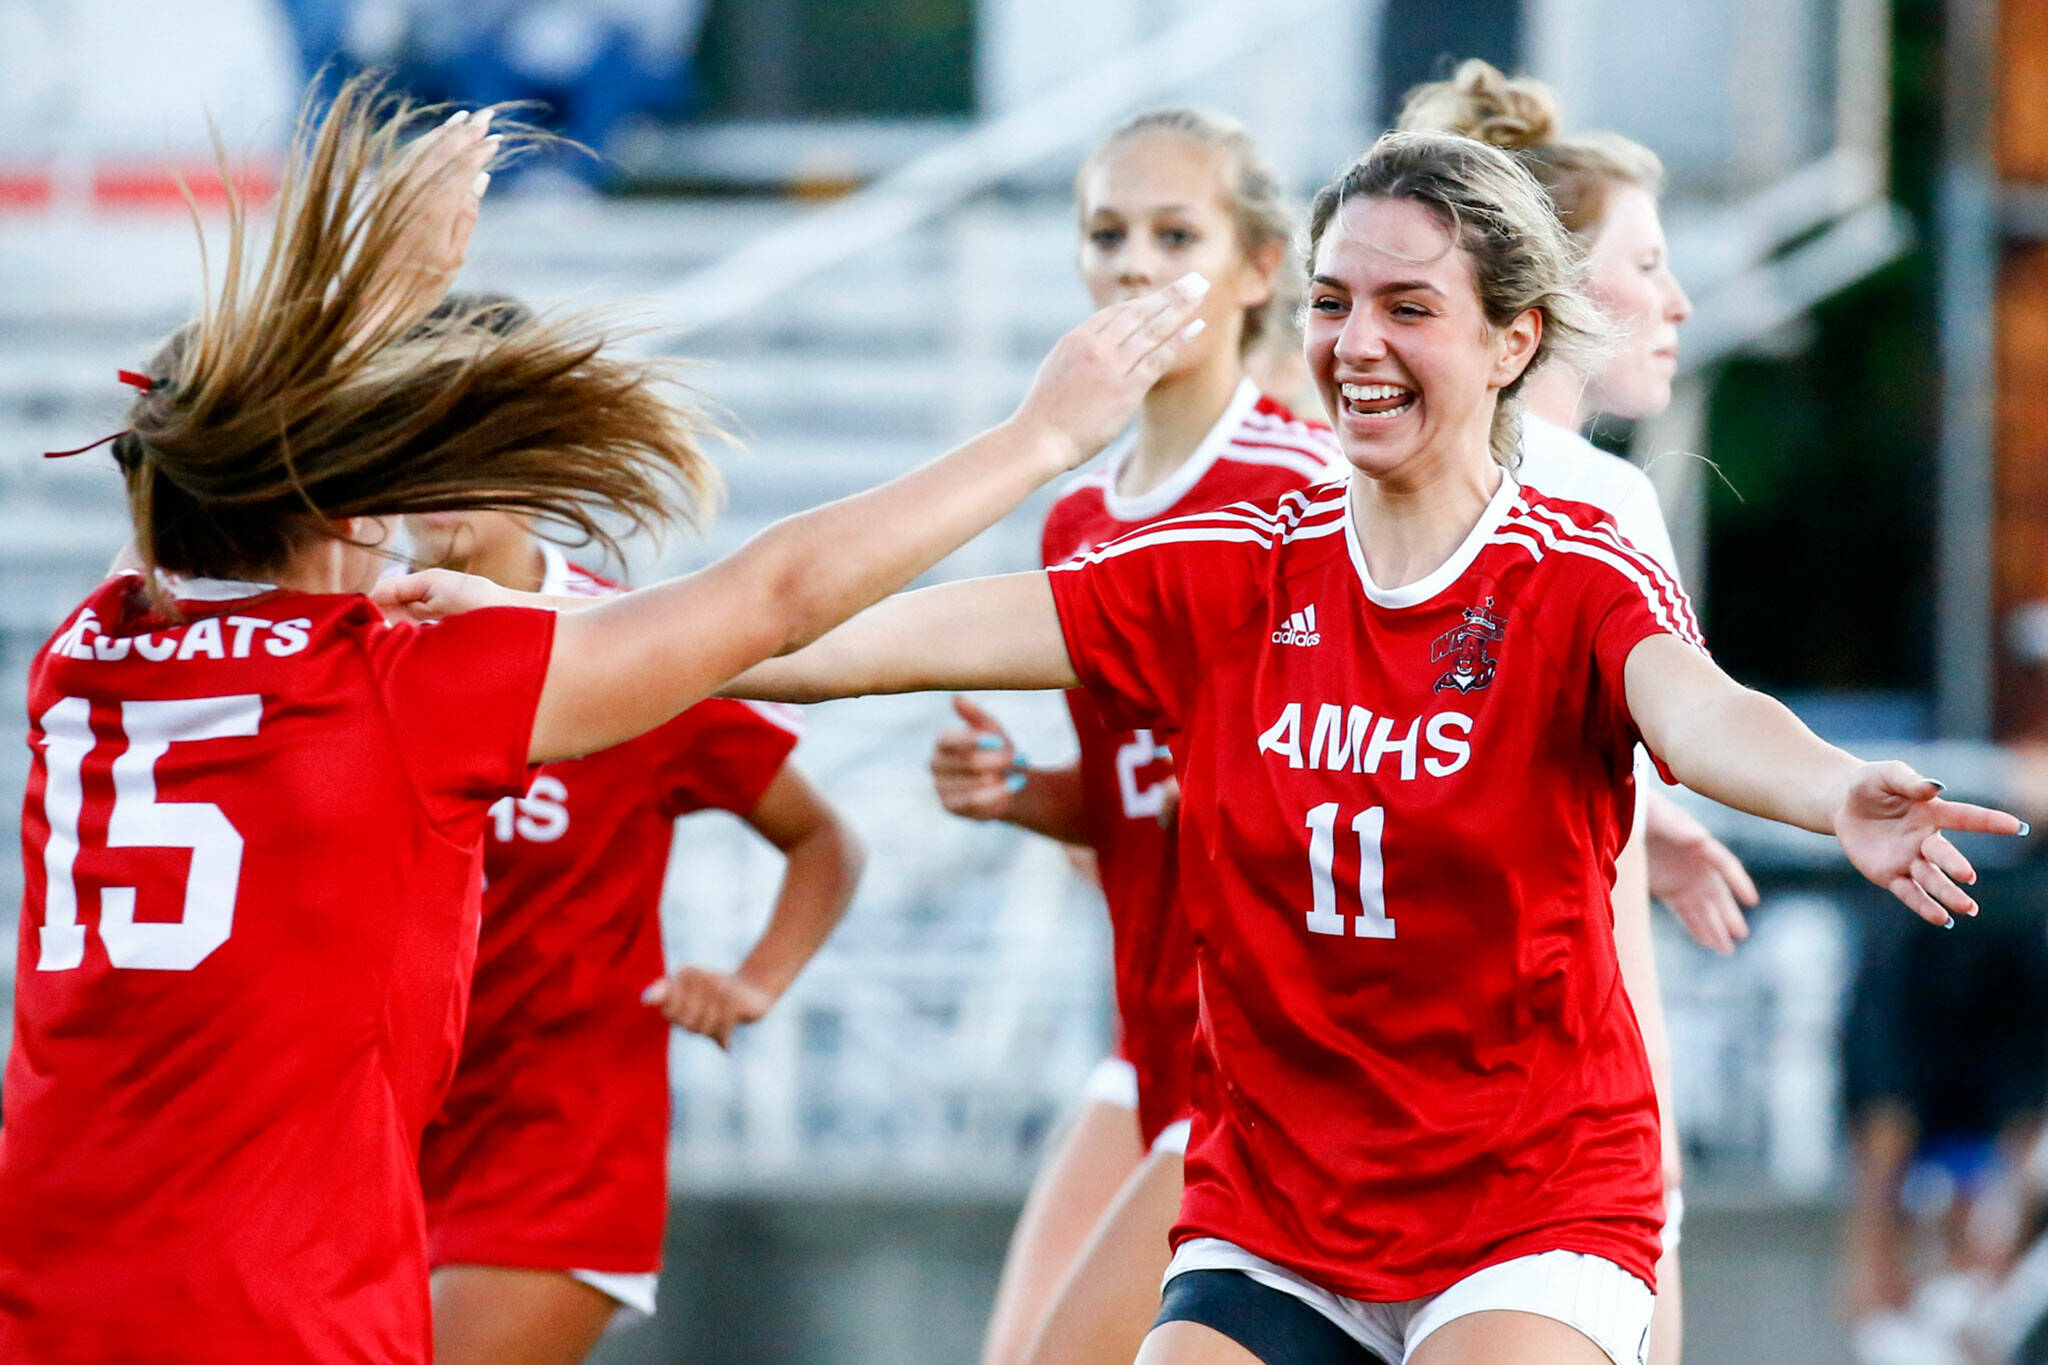 Archbishop Murphy’s Taylor Campbell (right) celebrates her goal off a corner kick from Jordyn Latta (left) during a match against Monroe on Thursday night at Archbishop Murphy High School in Everett. (Kevin Clark / The Herald)